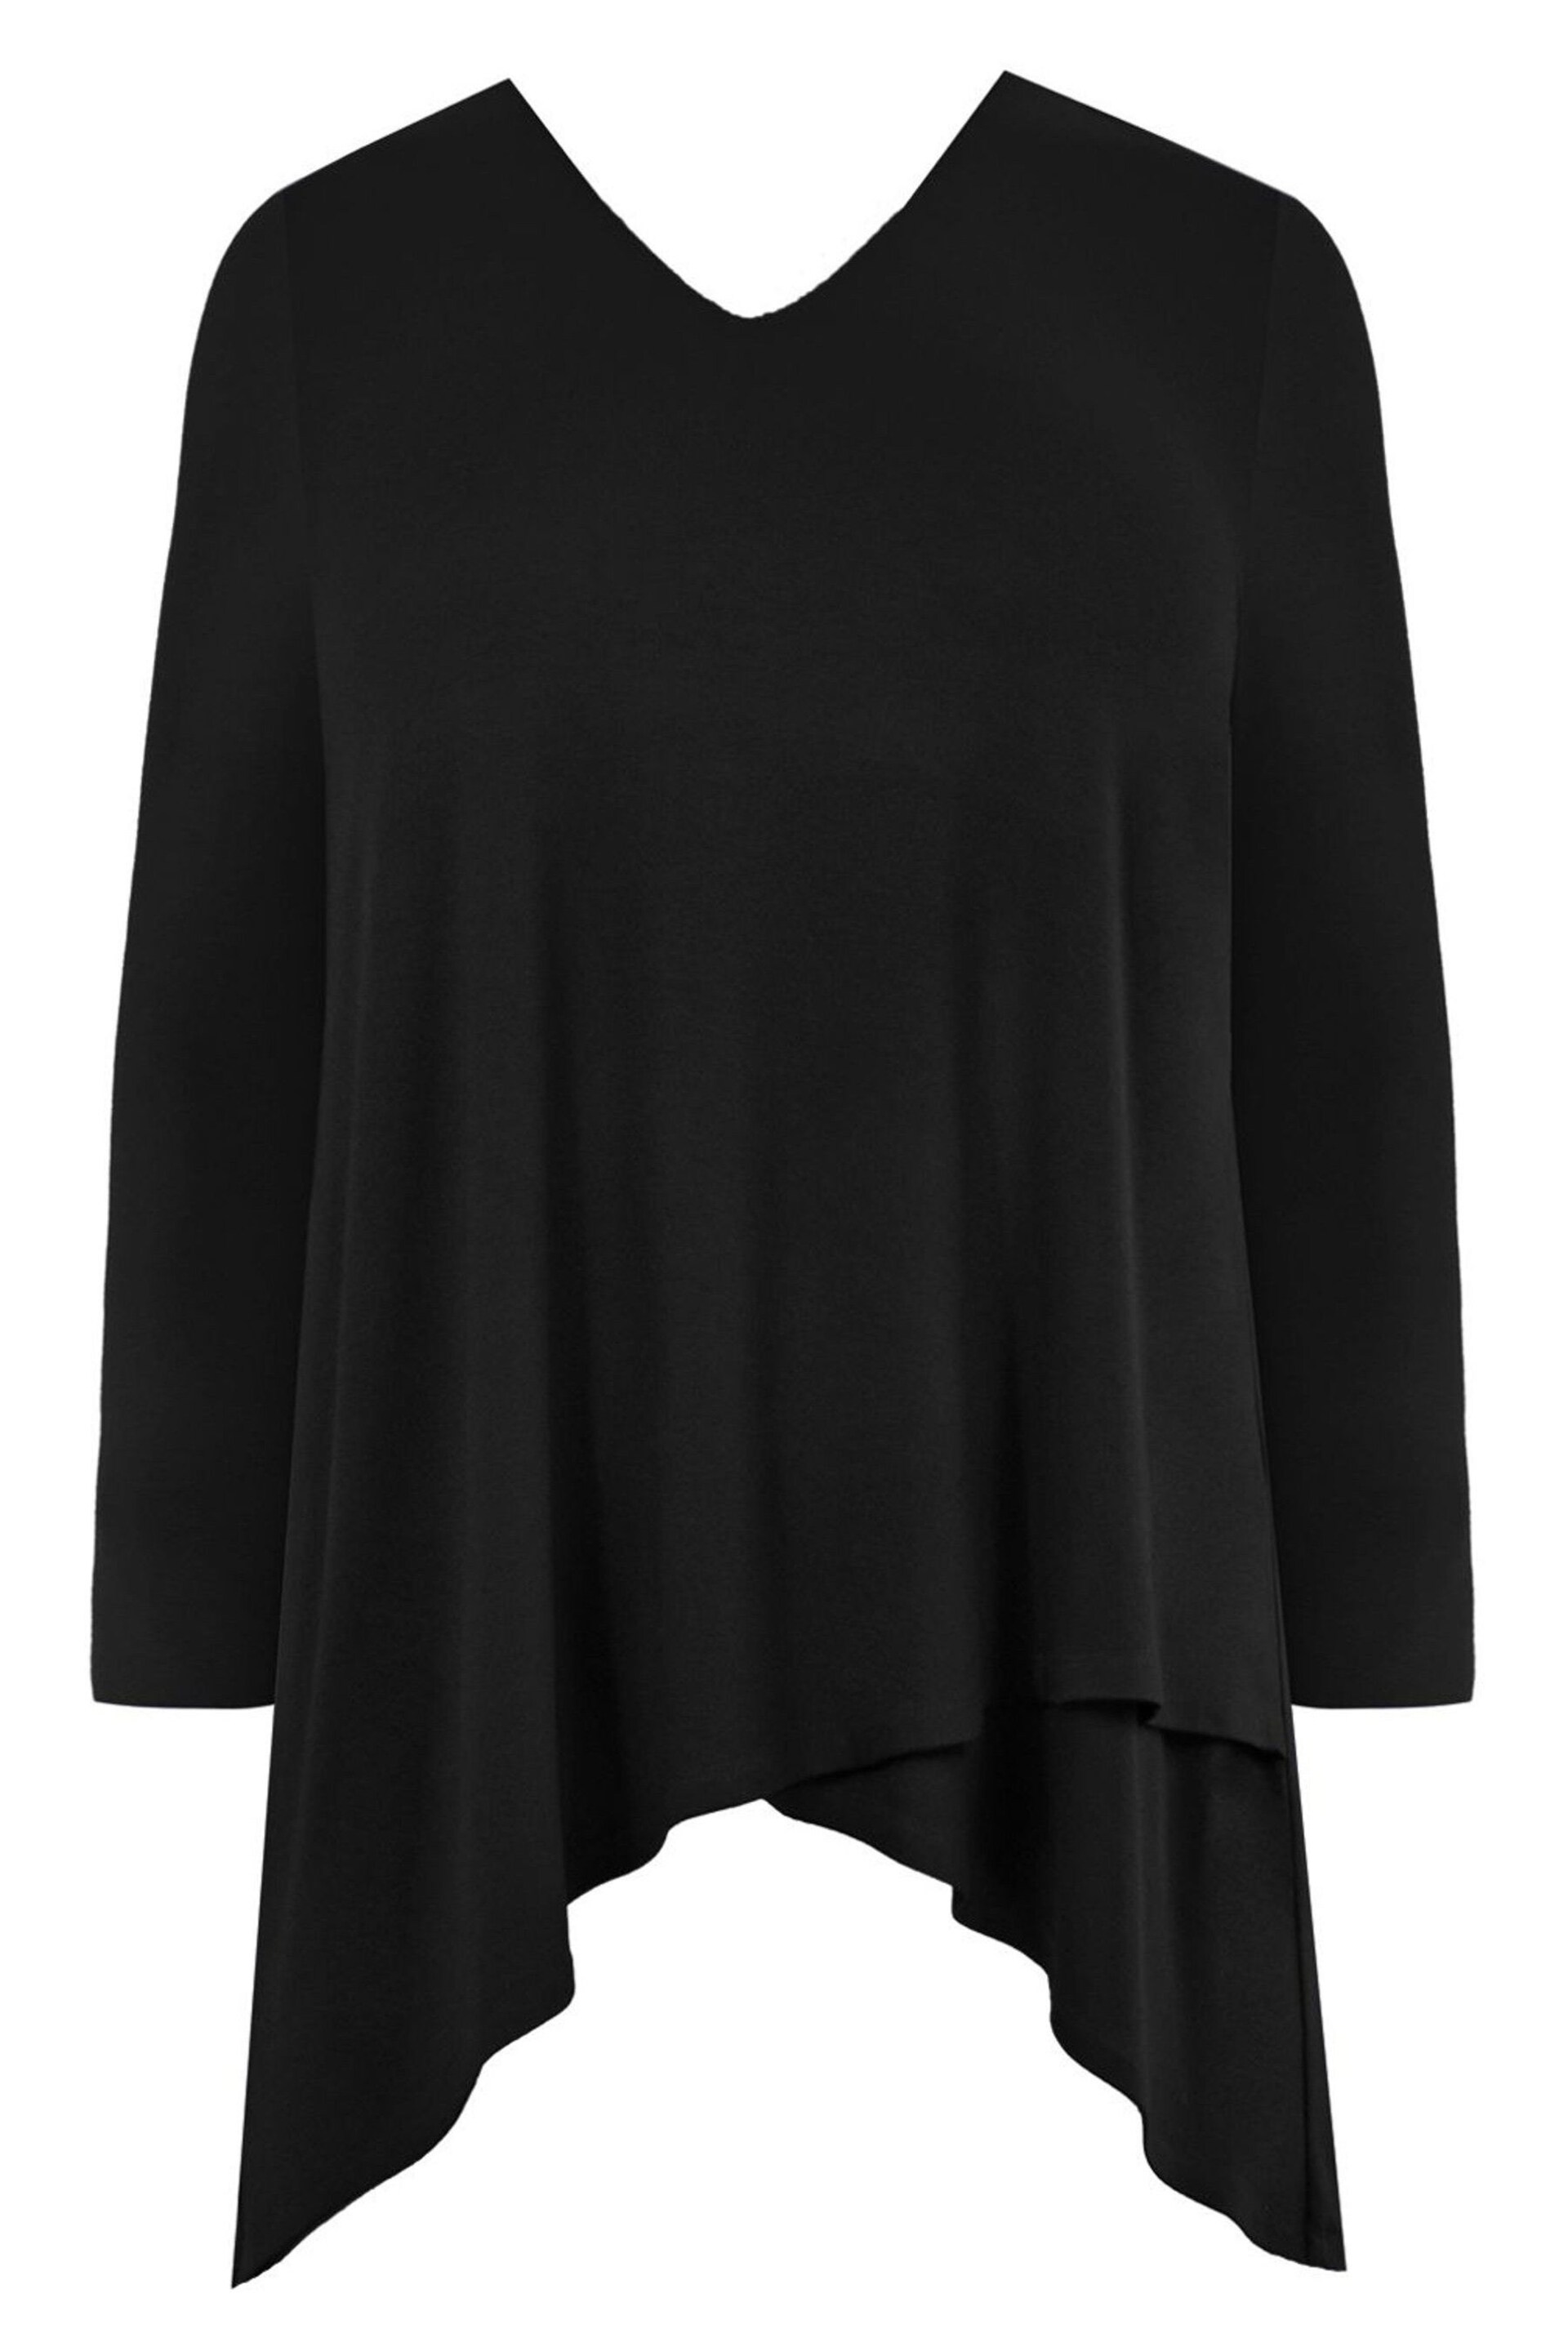 Live Unlimited Jersey High Low Tunic - Image 5 of 5